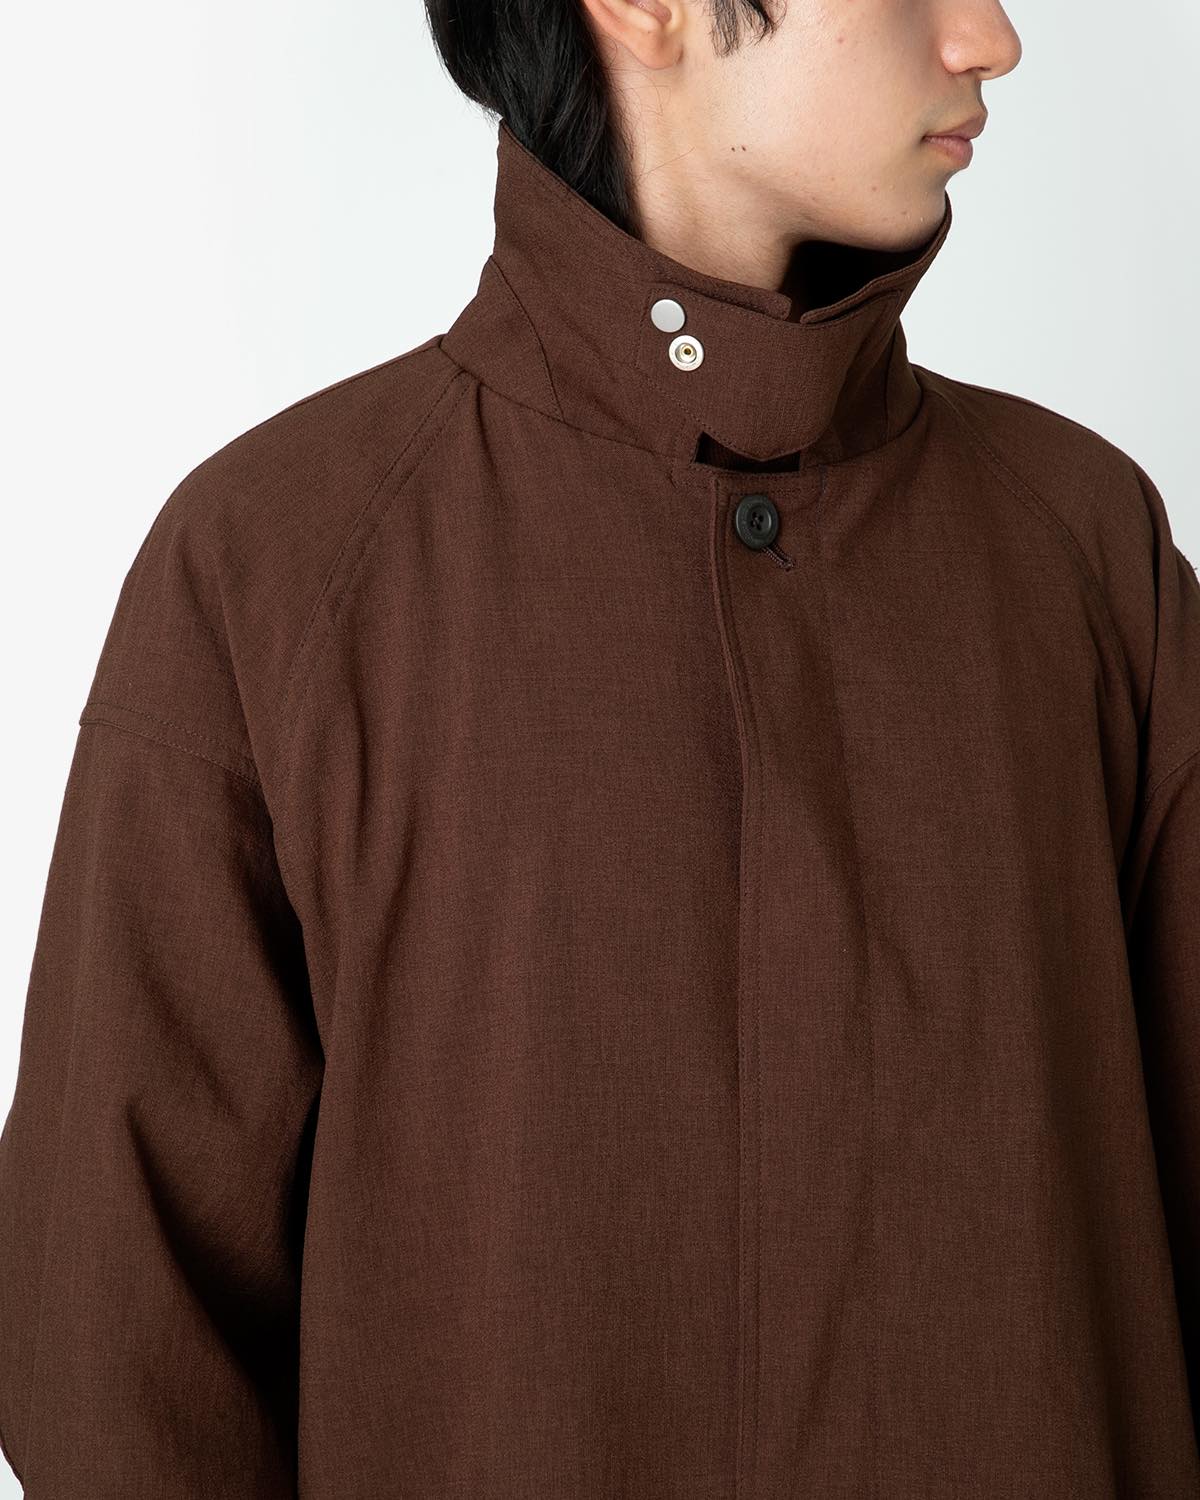 WORKER LONG COAT POLY SHANTUNG WITH GORE-TEX WINDSTOPPER®